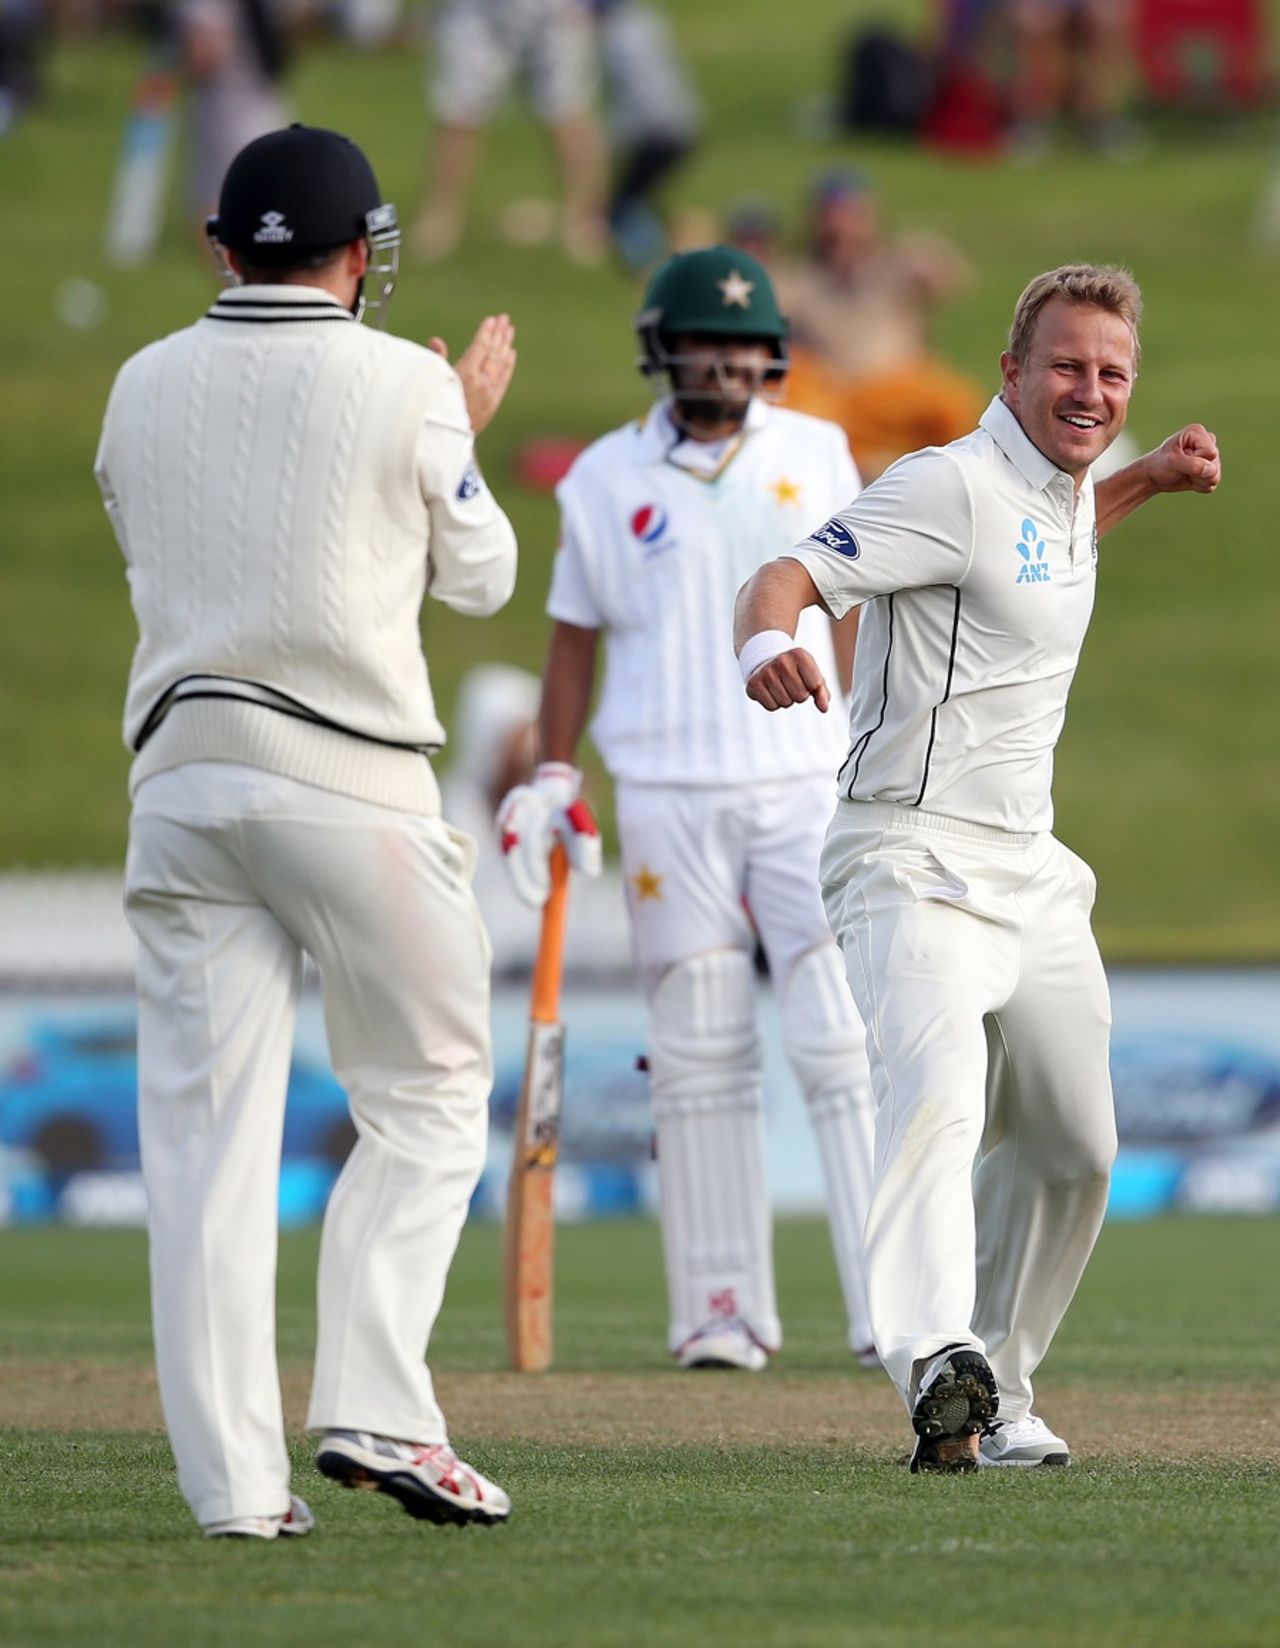 Neil Wagner took two wickets in two balls, New Zealand v Pakistan, 2nd Test, Hamilton, 2nd day, November 26, 2016